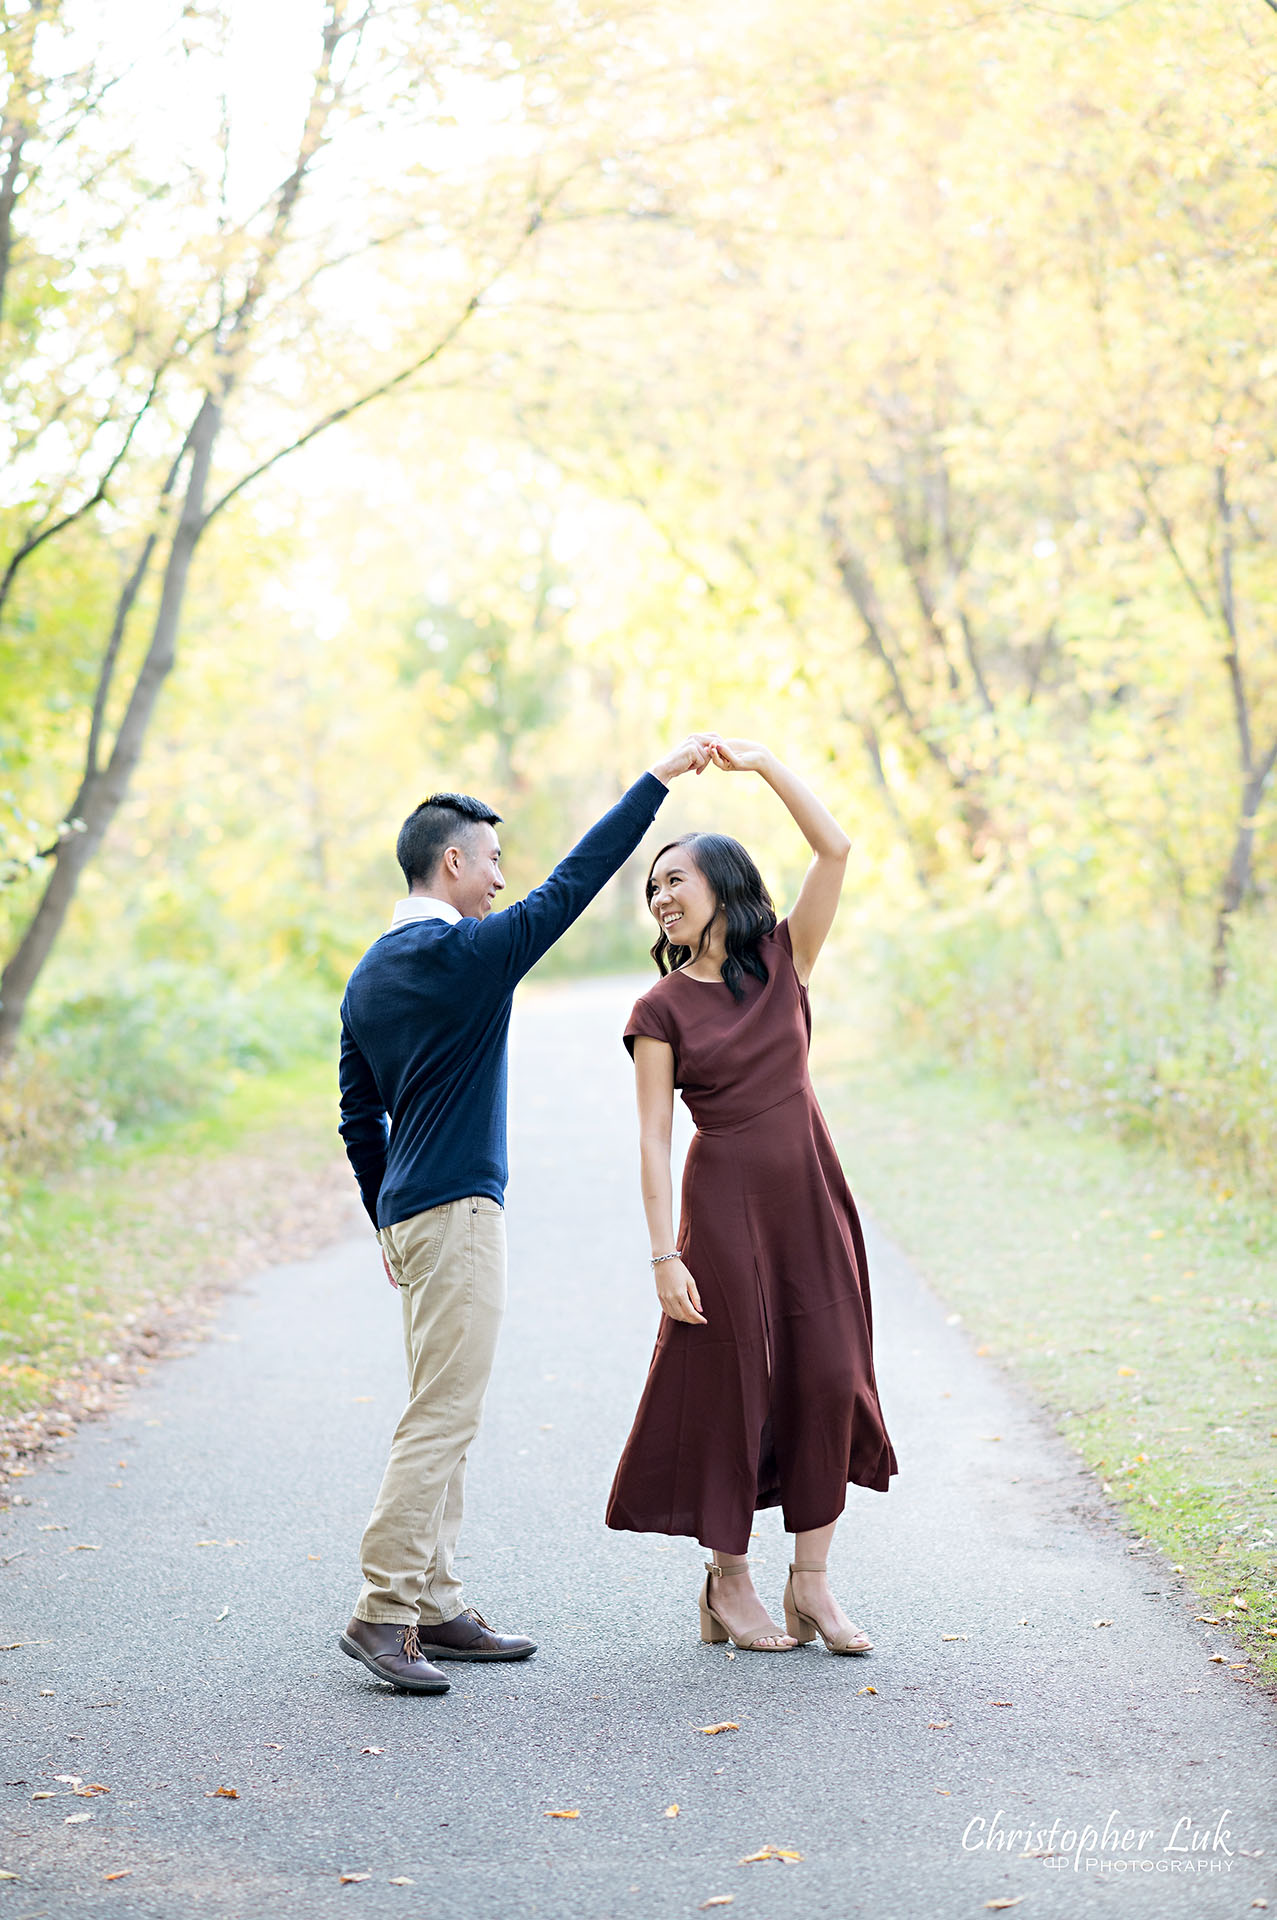 Christopher Luk Toronto Wedding Engagement Session Photographer Autumn Fall Leaves Natural Candid Photojournalistic Bride Groom Holding Hands Walking Together Pathway Hiking Trail Dancing Twirl Spin